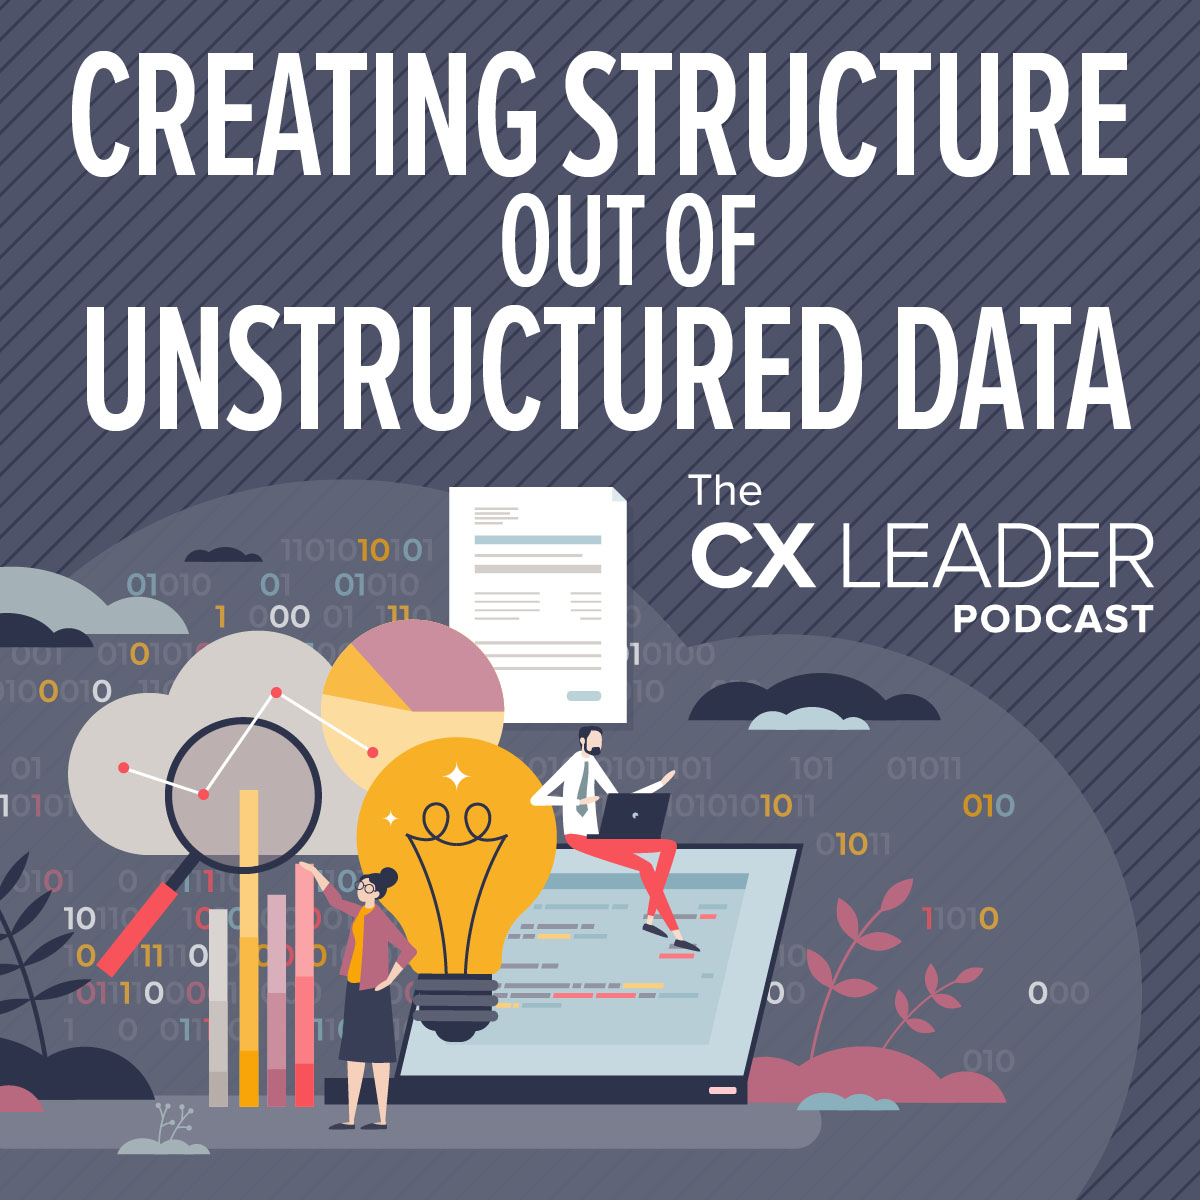 Creating Structure out of Unstructured Data